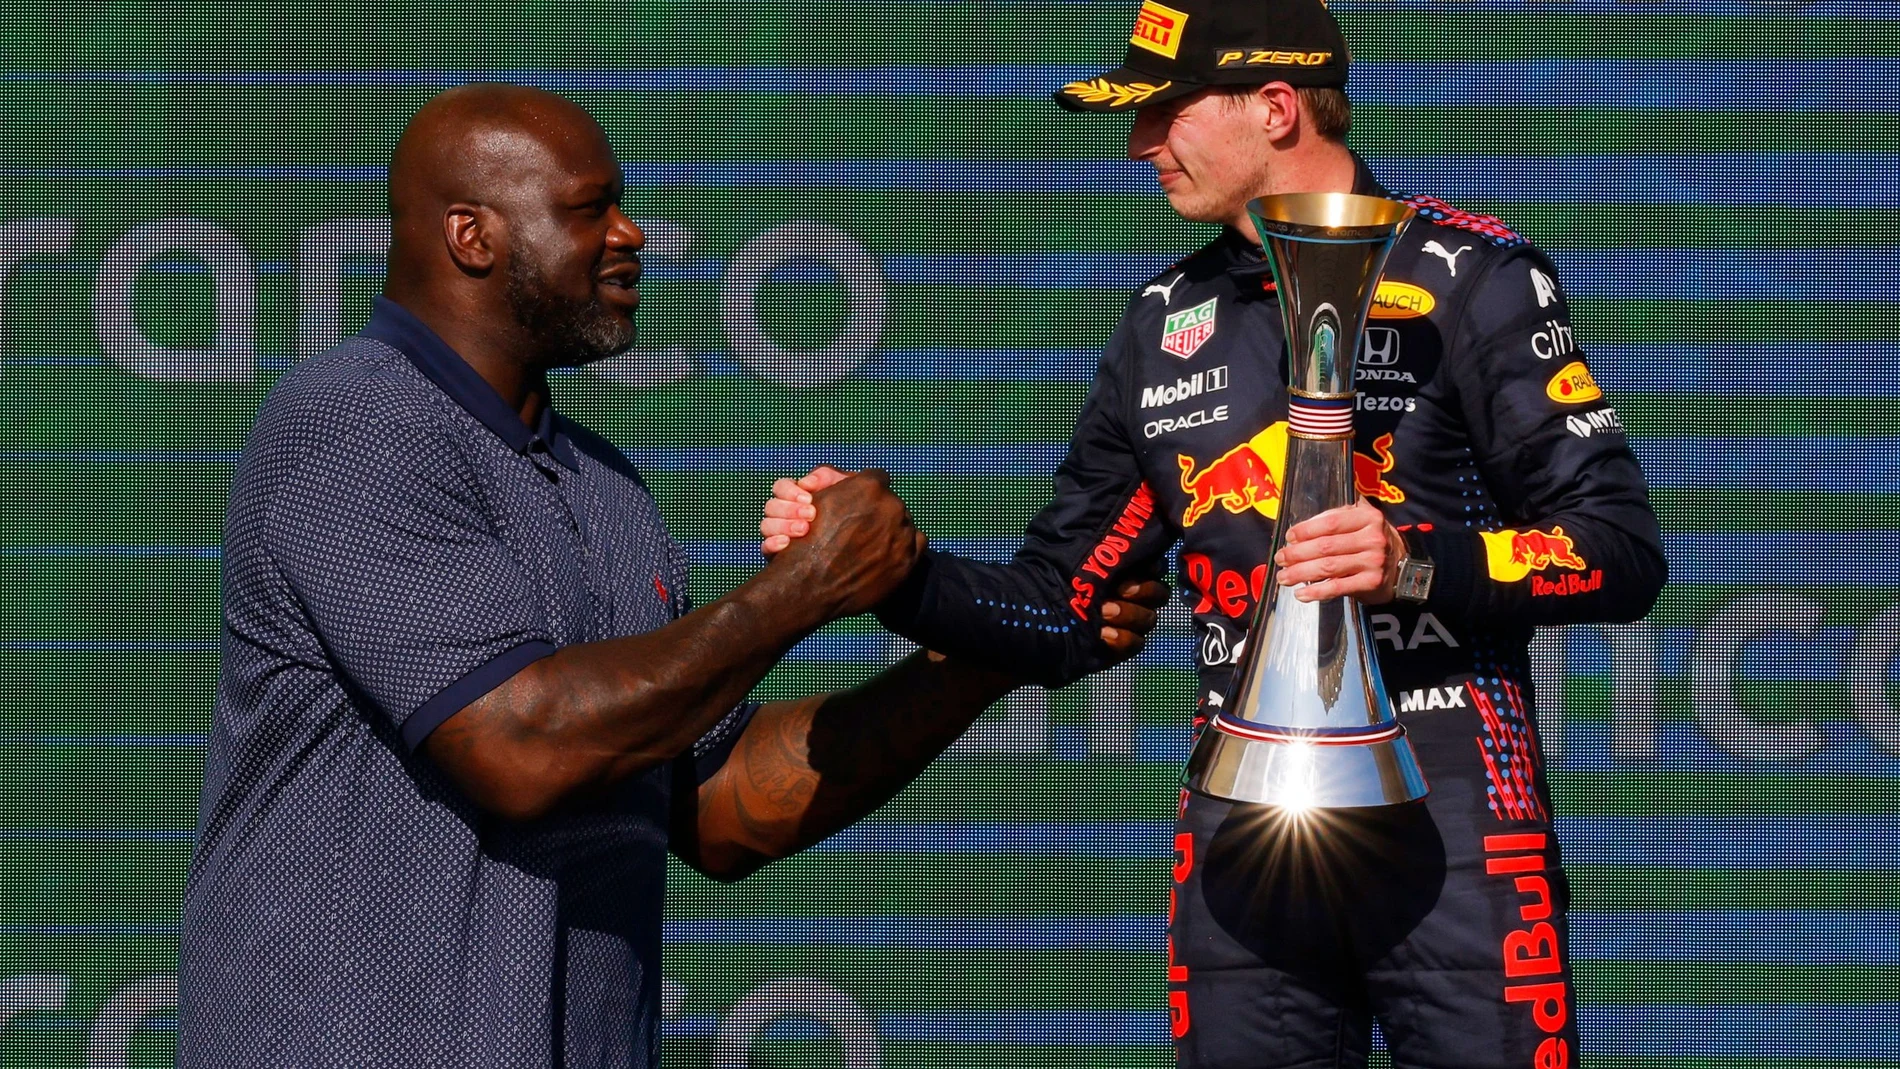 Formula One F1 - United States Grand Prix - Circuit of the Americas, Austin, Texas, U.S. - October 24, 2021 American former professional basketball player Shaquille O'Neal presents the winner trophy to Red Bull's Max Verstappen on the podium REUTERS/Brian Snyder